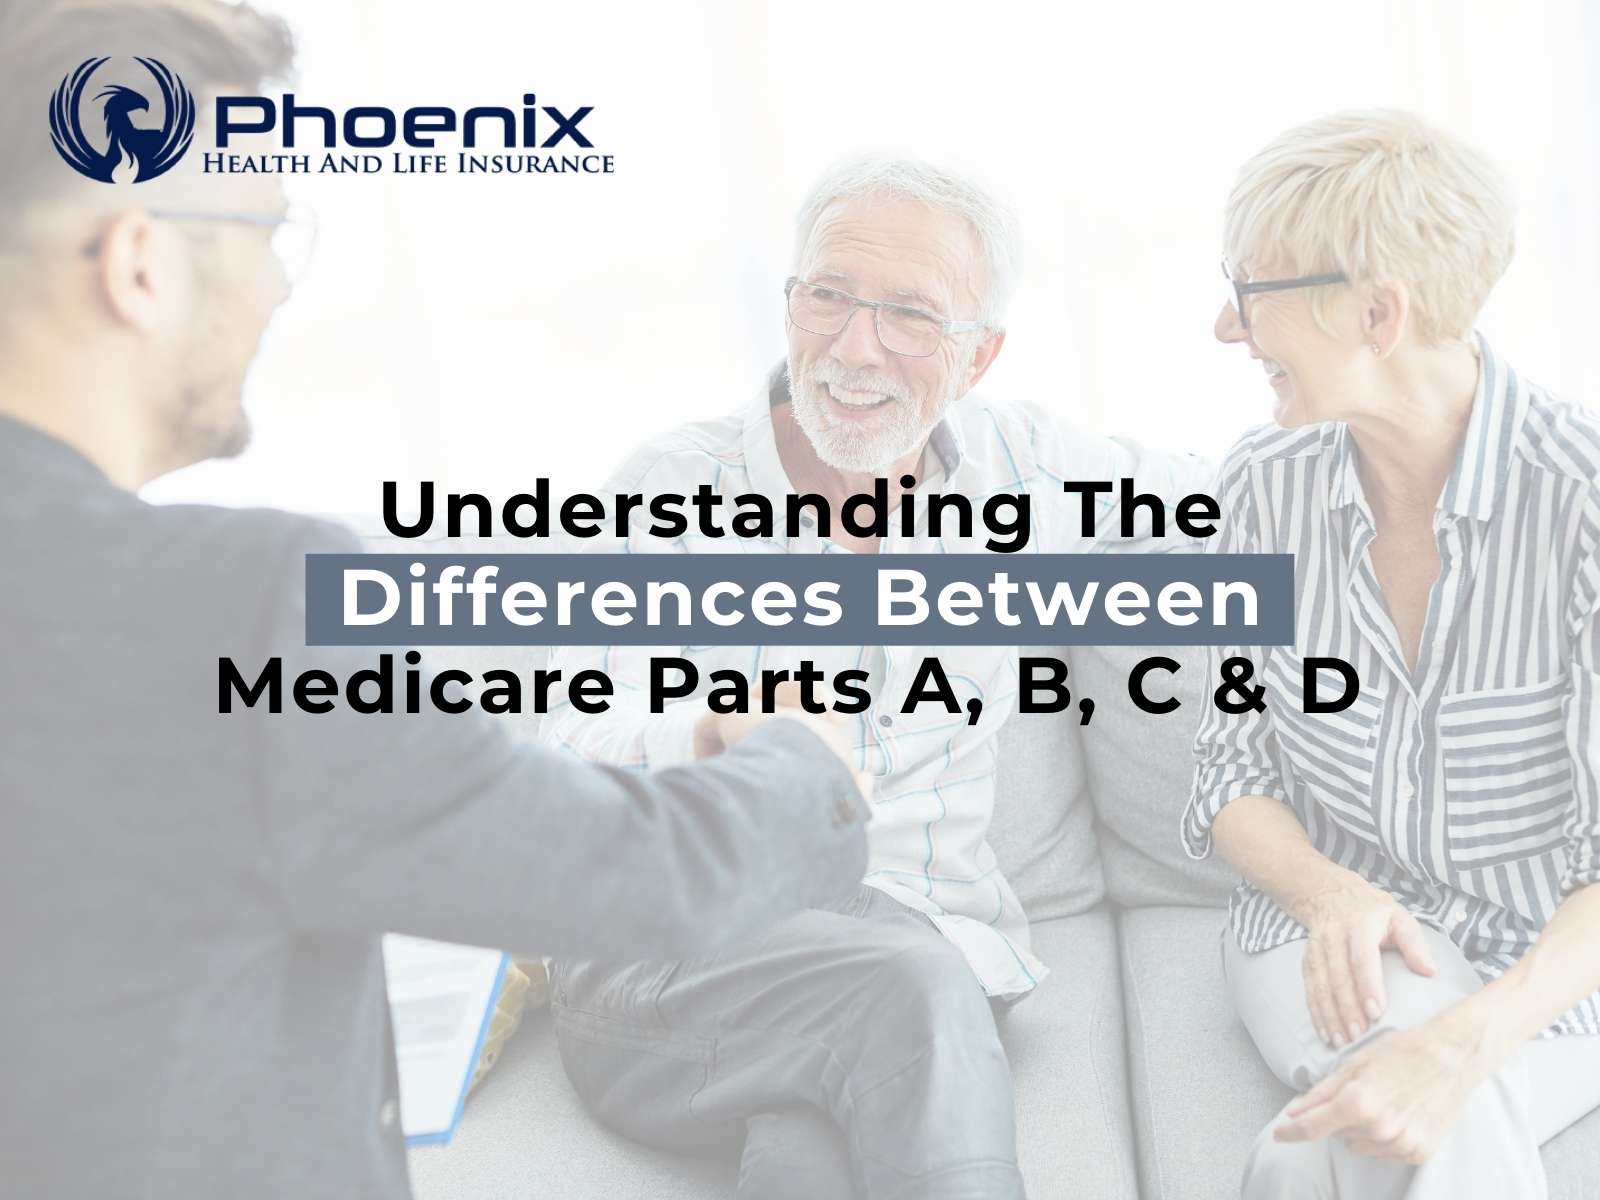 Understanding The Differences Between Medicare Parts A, B, C & D